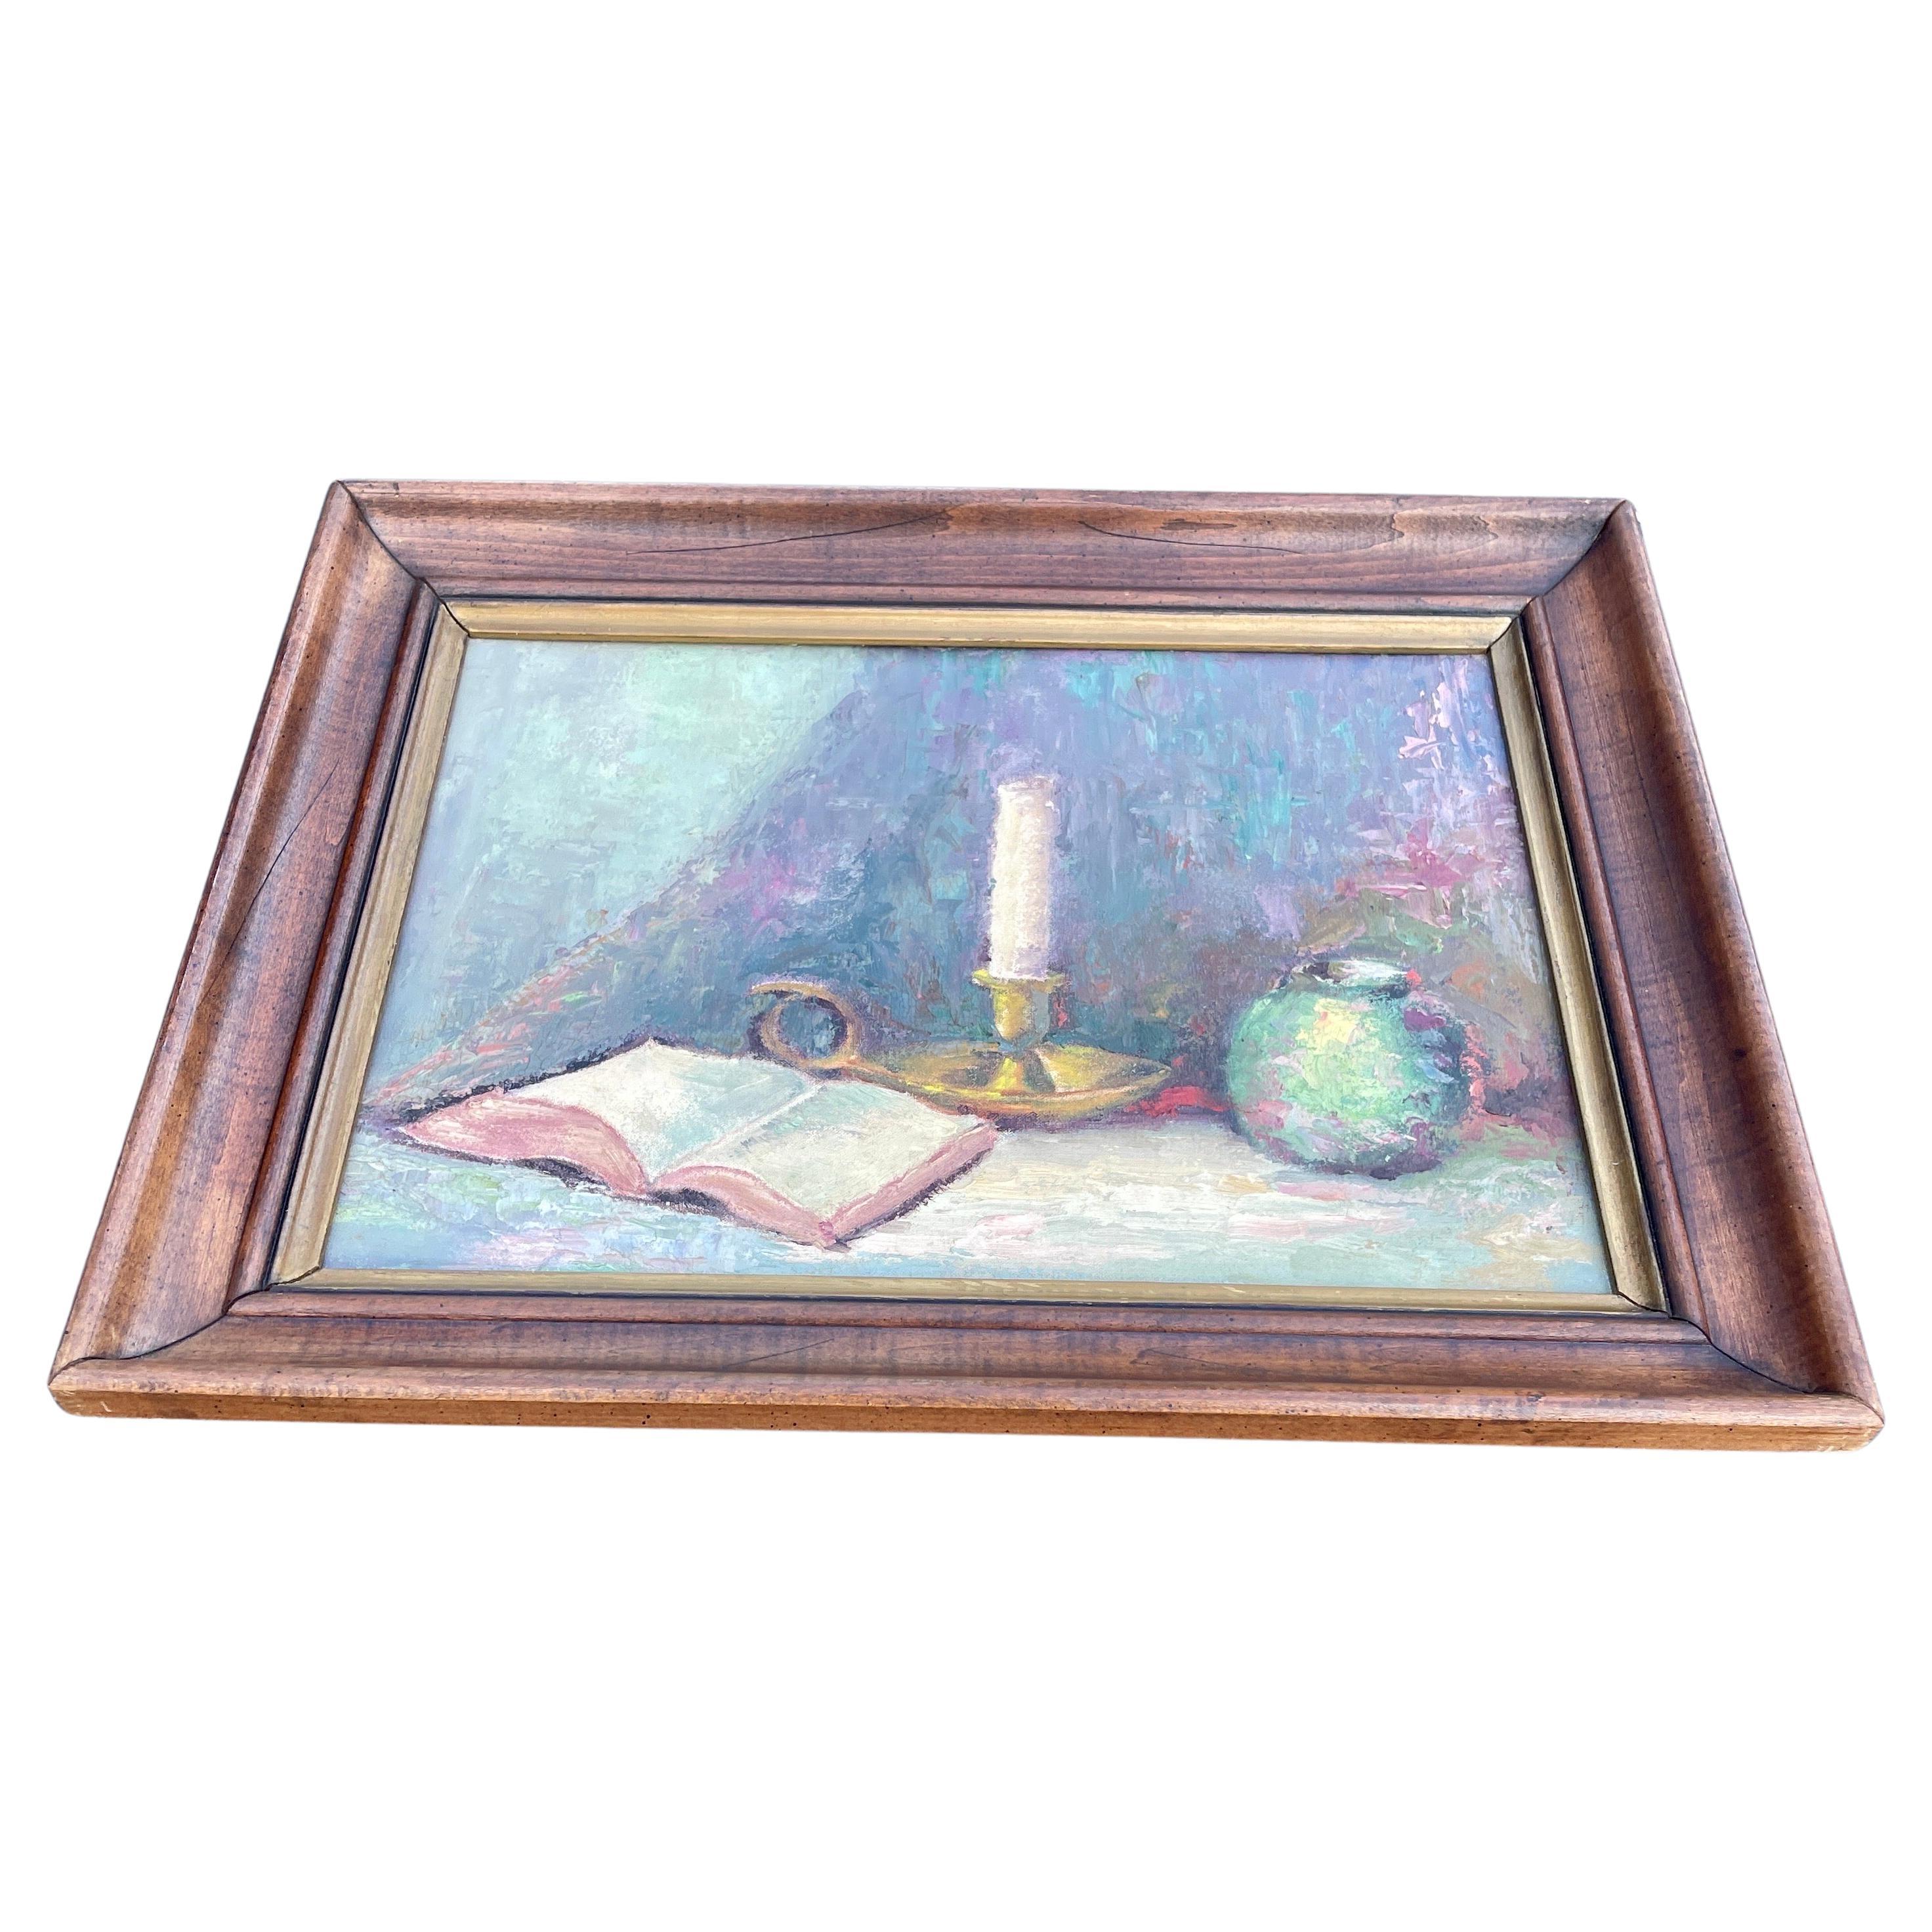 Hand-Painted Still Life Oil Painting on Board with Book and Brass Candlestick For Sale